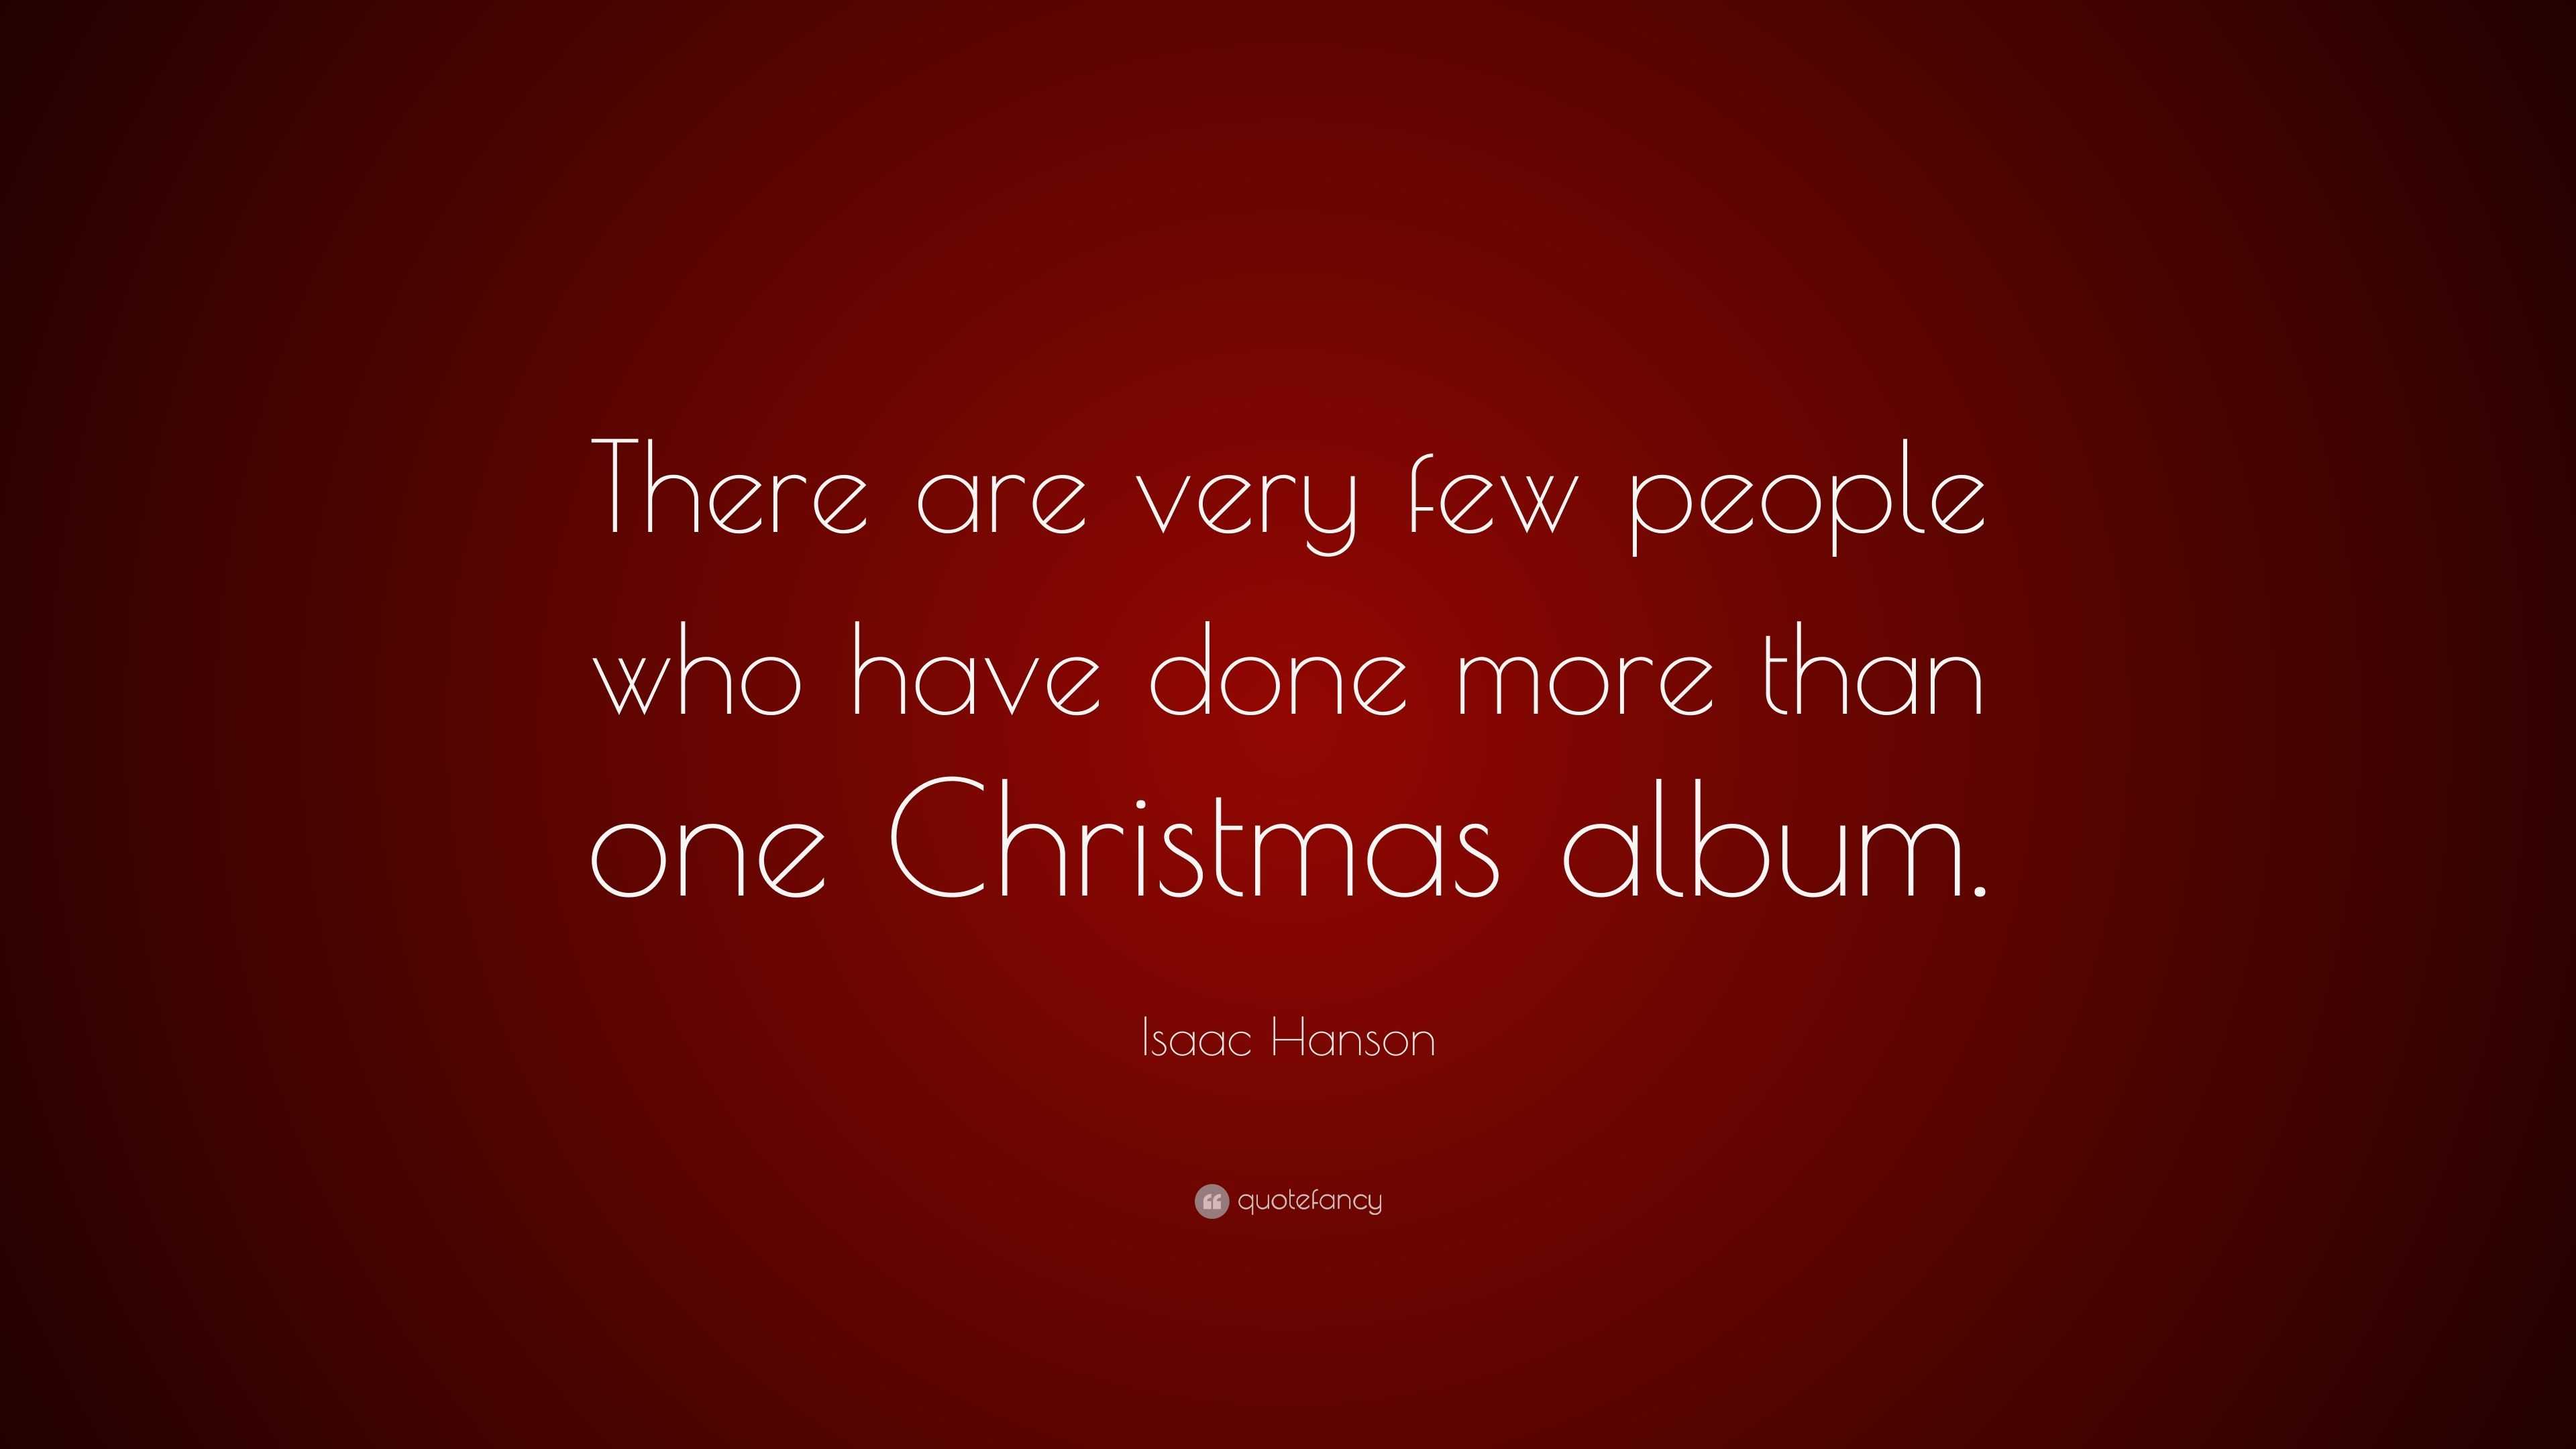 Isaac Hanson Quote: “There are very few people who have done more than ...